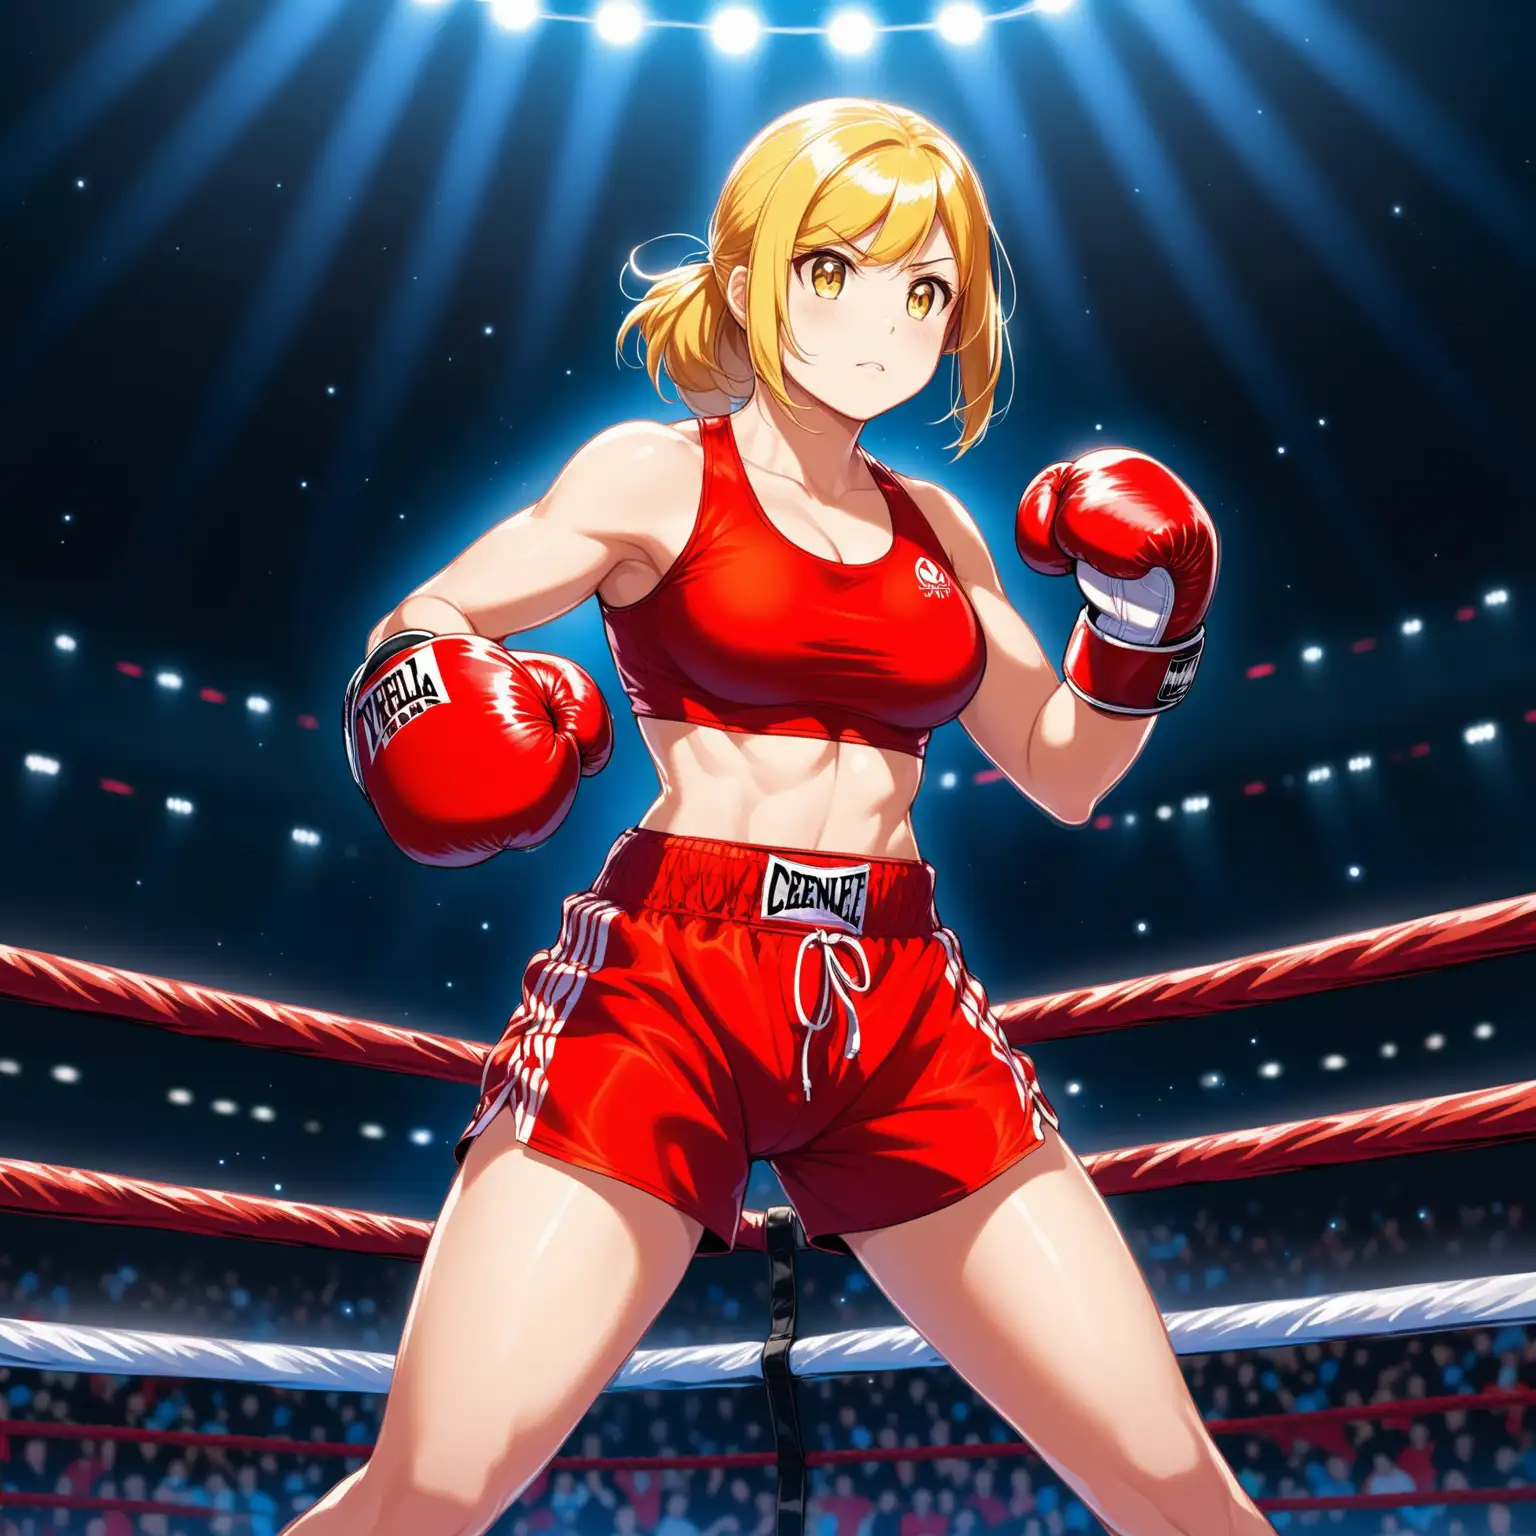 Confident Female Boxer in Vibrant Red Gear Ready for the Ring